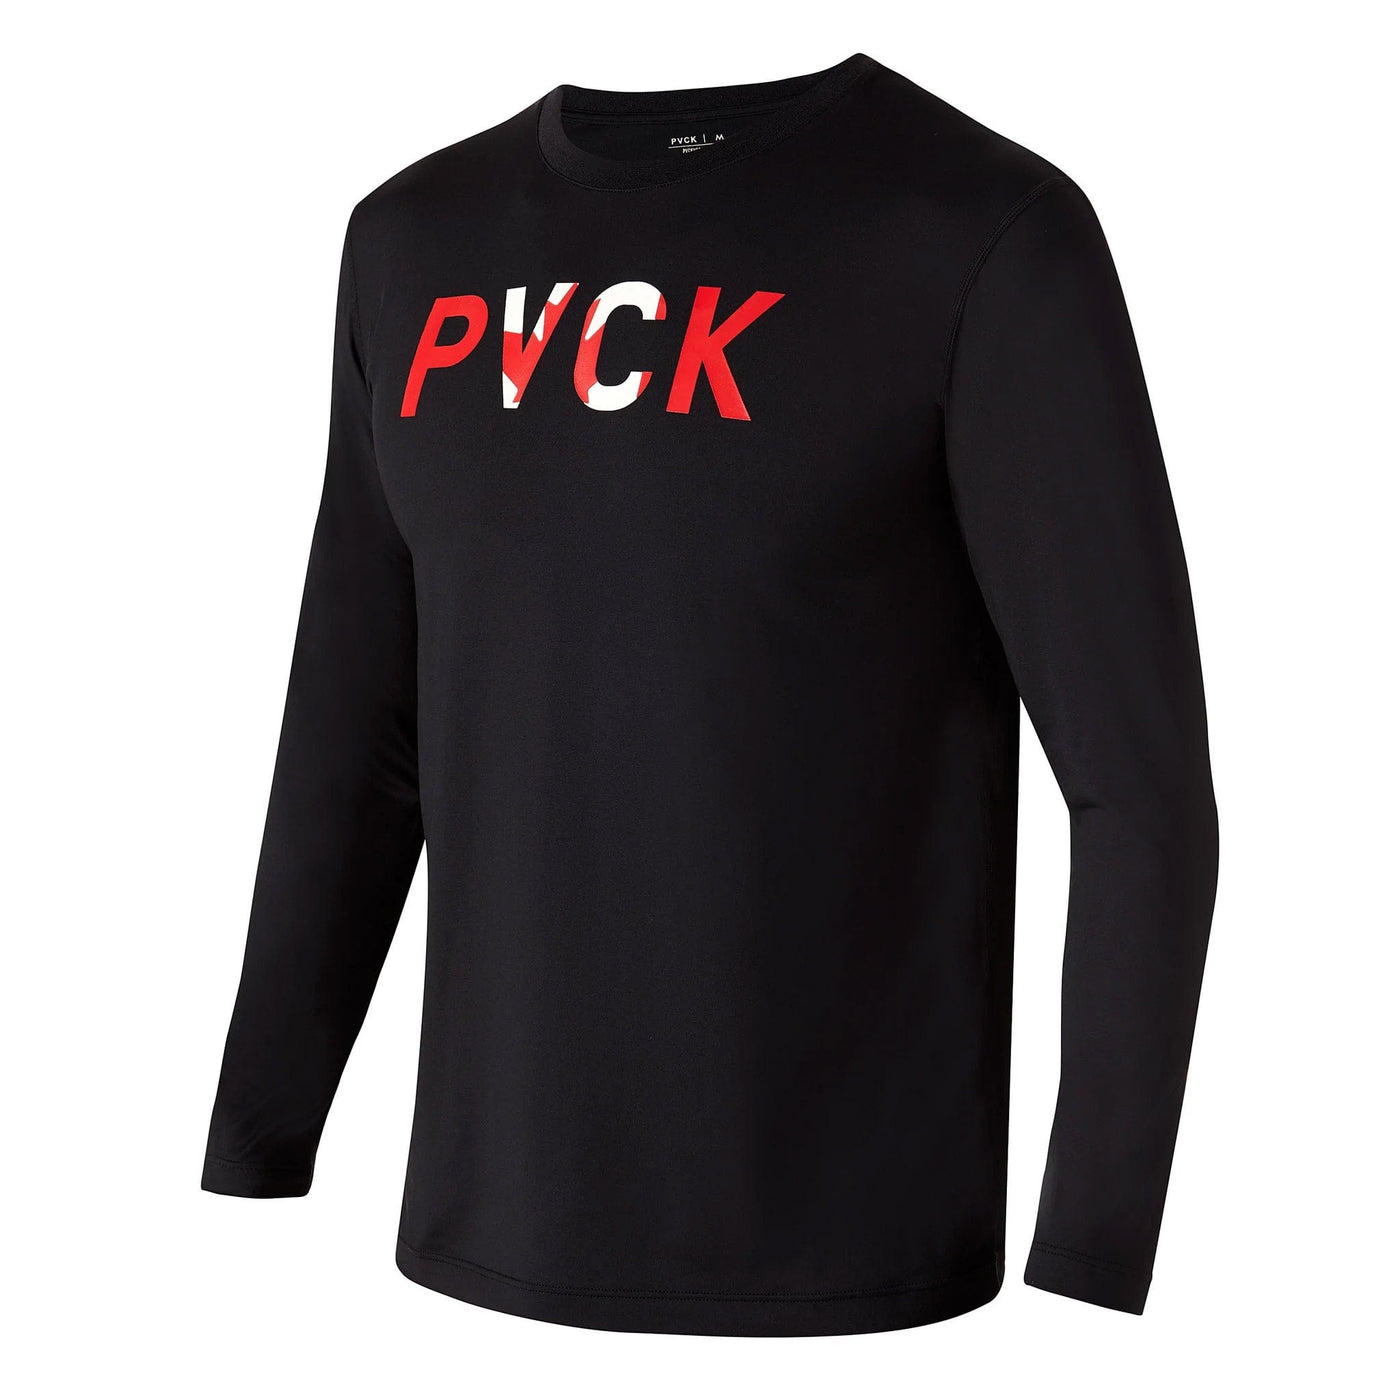 PVCK Performance Youth Baselayer Shirt - Canada - The Hockey Shop Source For Sports